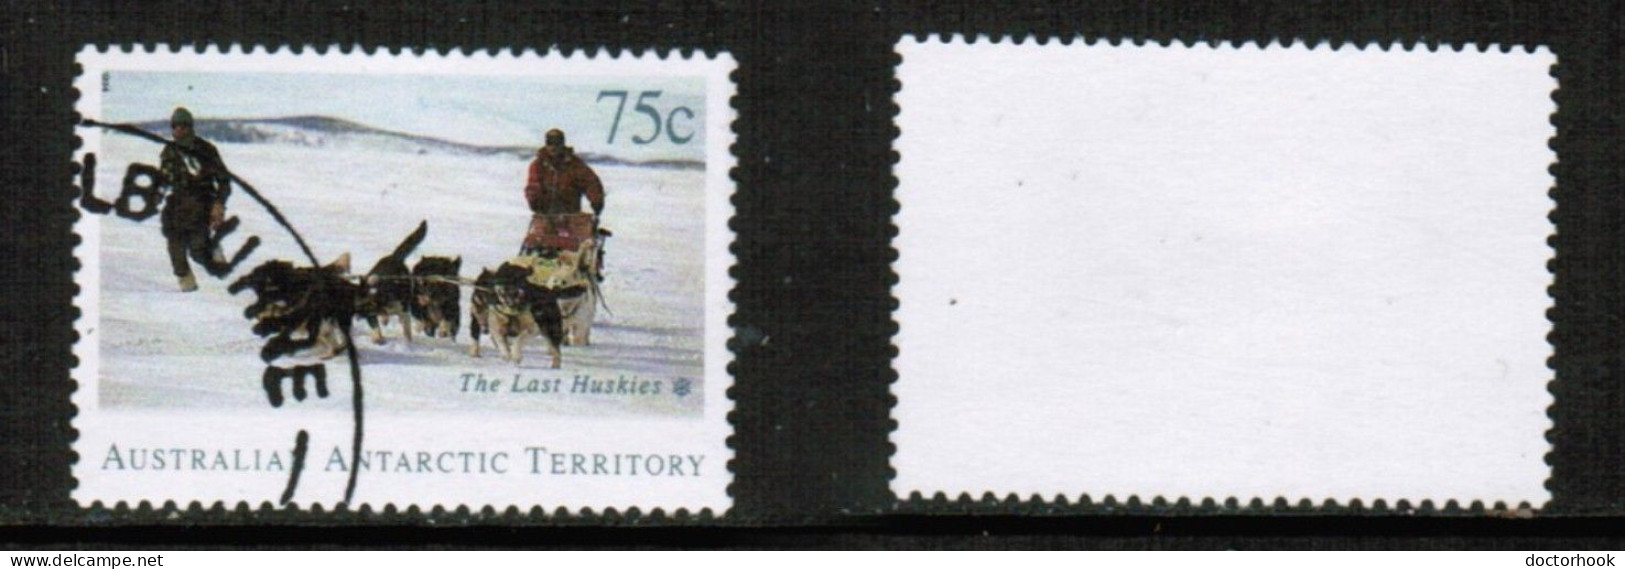 AUSTRALIAN ANTARCTIC TERRITORY   Scott # L 91 USED (CONDITION AS PER SCAN) (Stamp Scan # 929-4) - Oblitérés